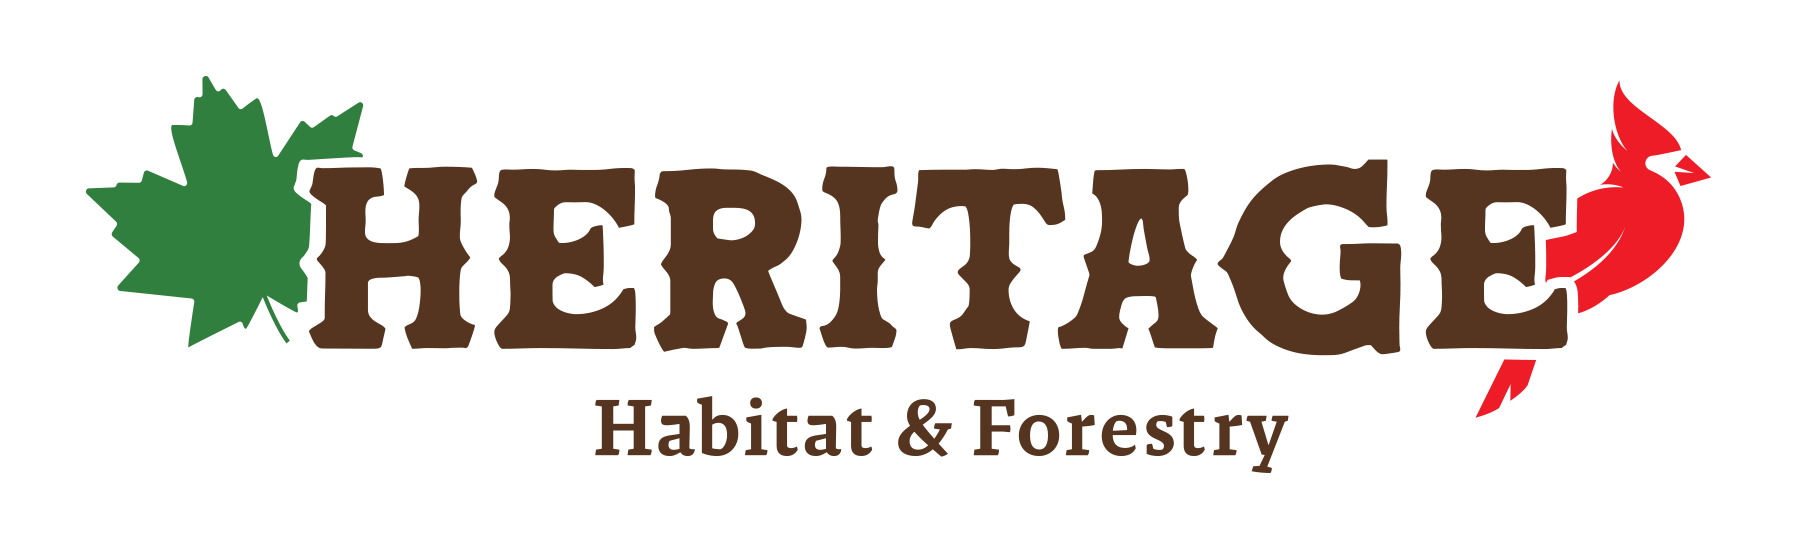 Heritage Habitat and Forestry Logo